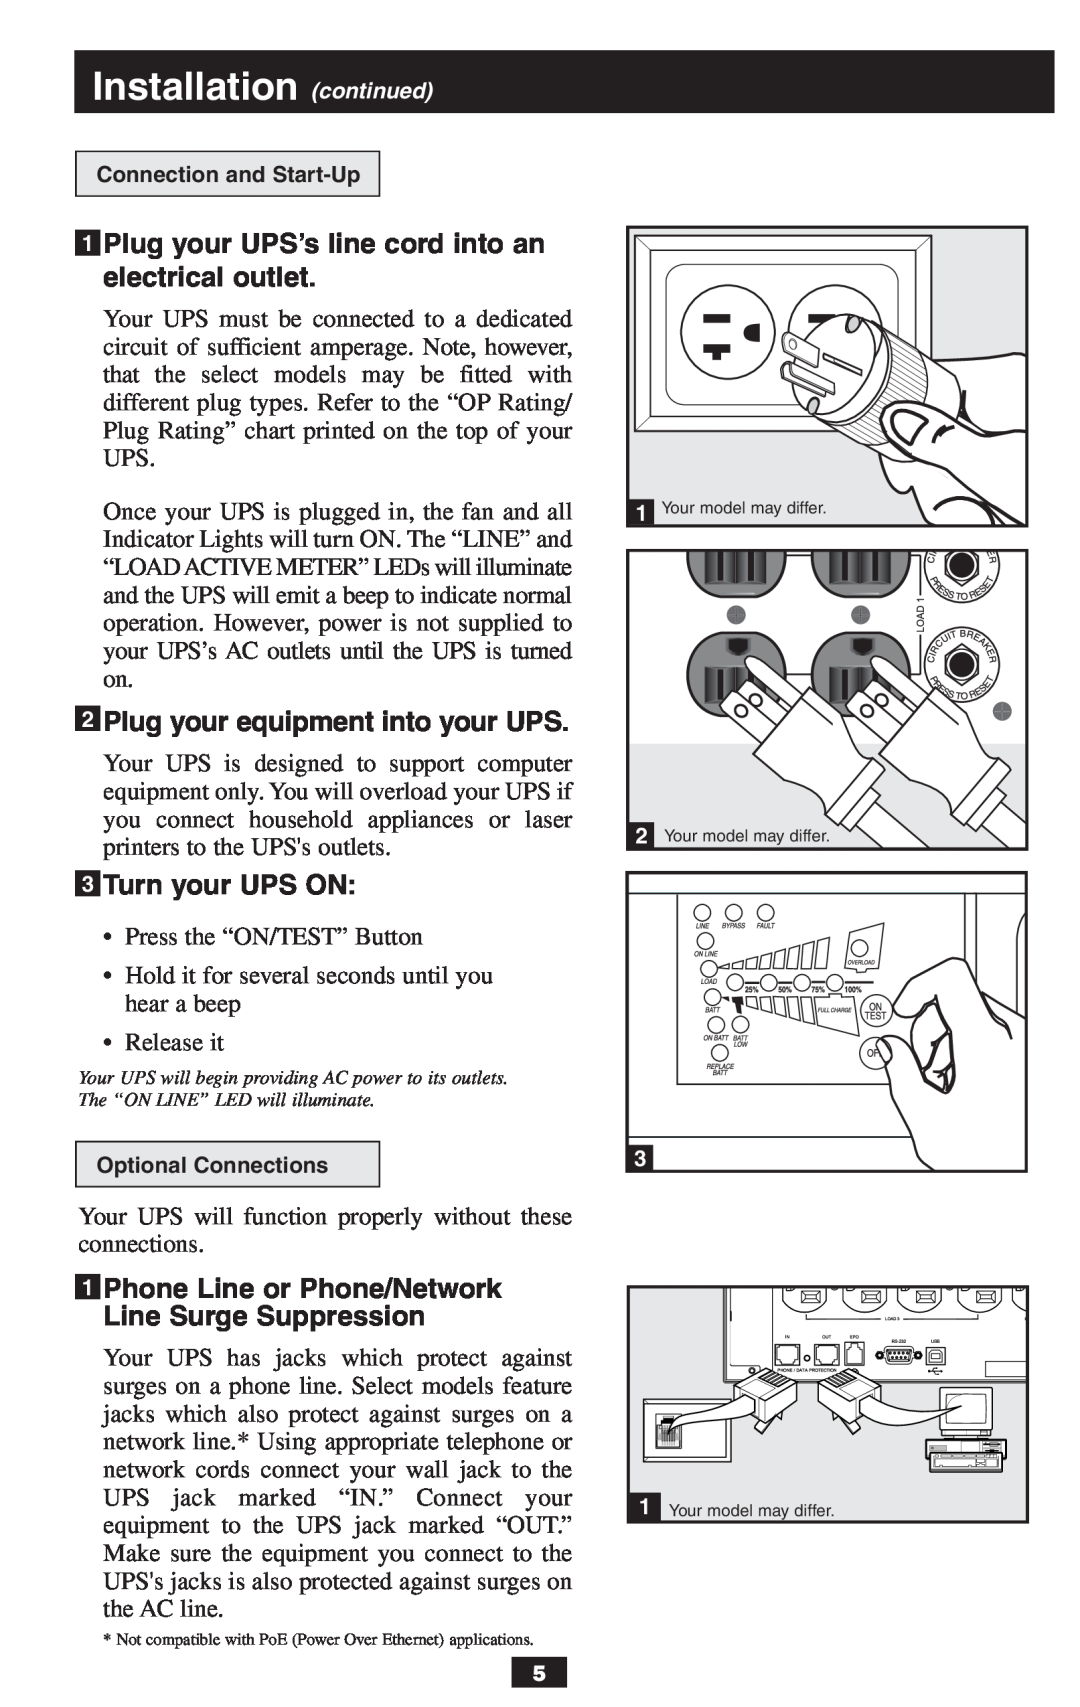 Tripp Lite 2-9USTAND owner manual InstallationImporant continuedSafety Instructions, Plug your equipment into your UPS 